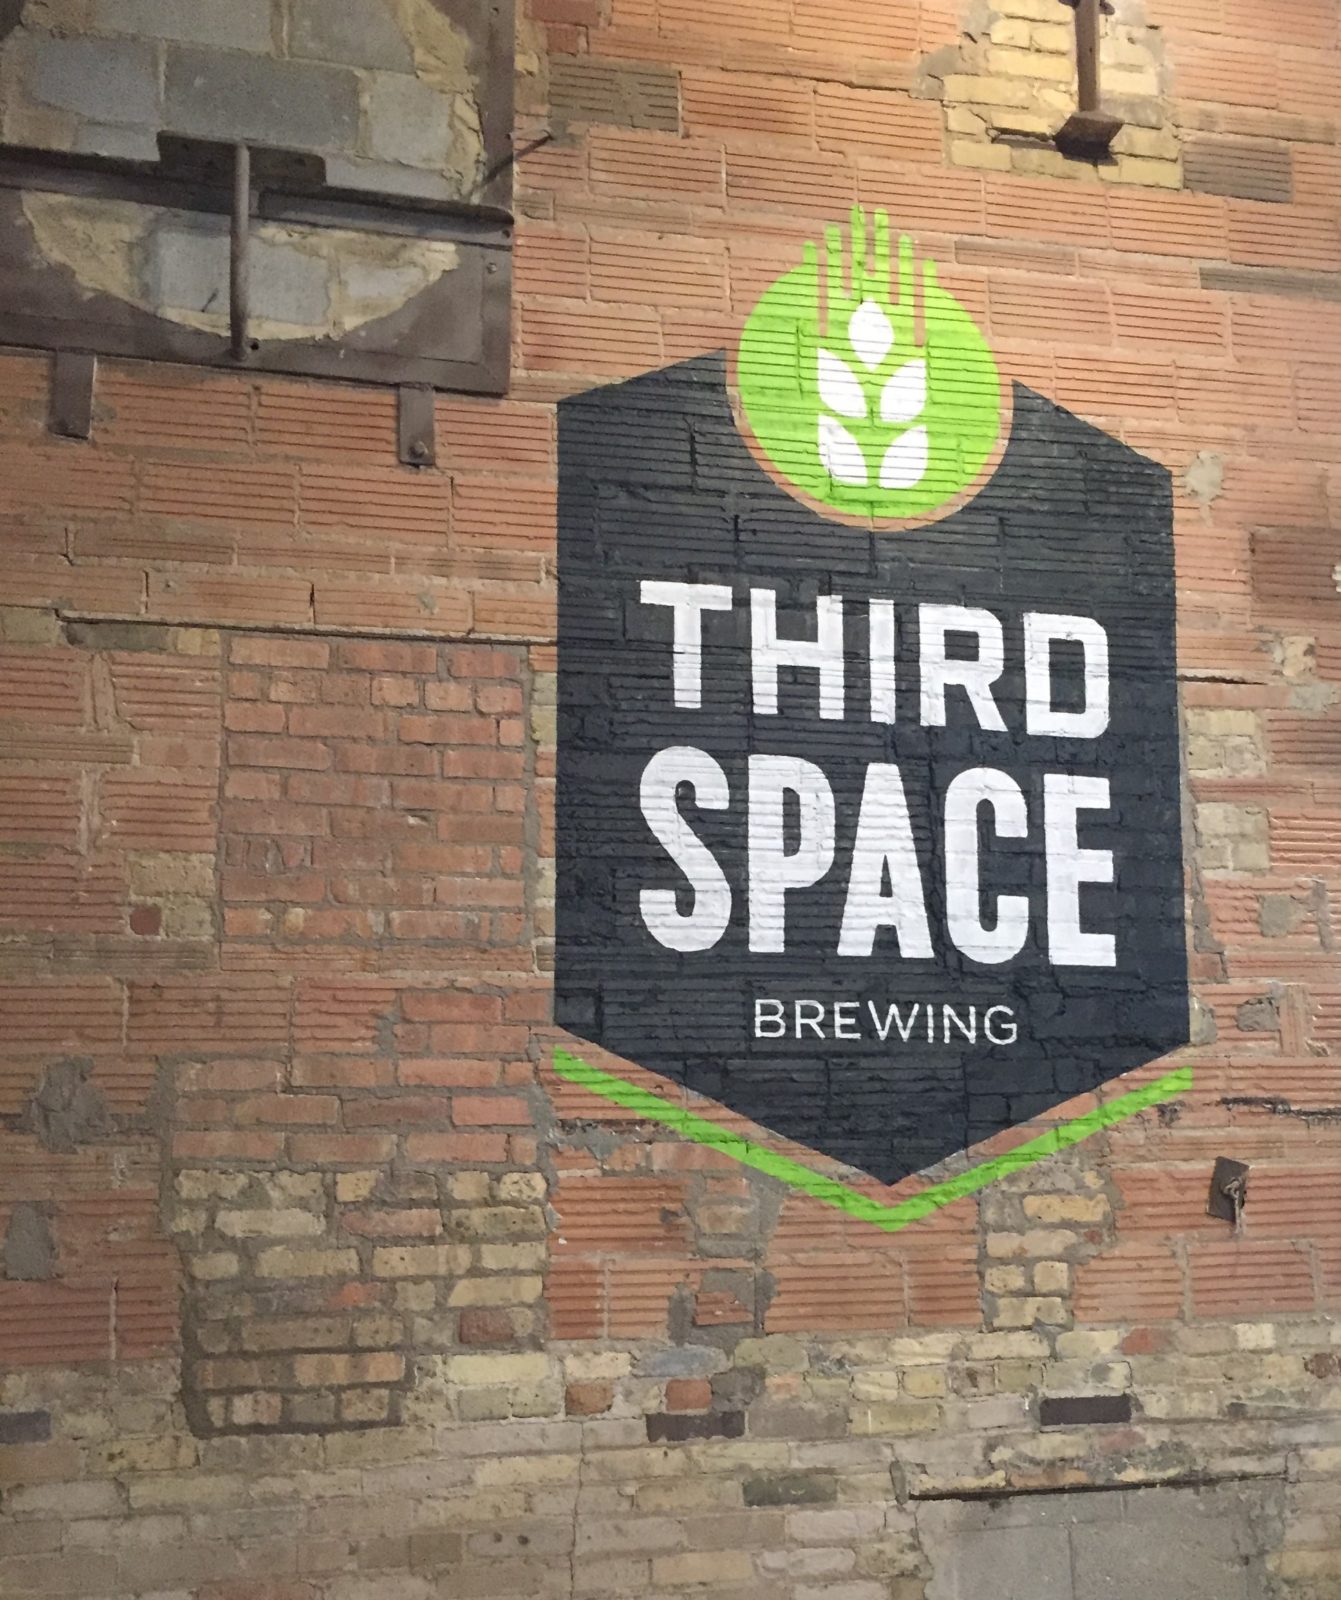 Barrel-Aged Irish Coffee Stout, Mystic Knot, returns to Third Space Brewing for the 6th year